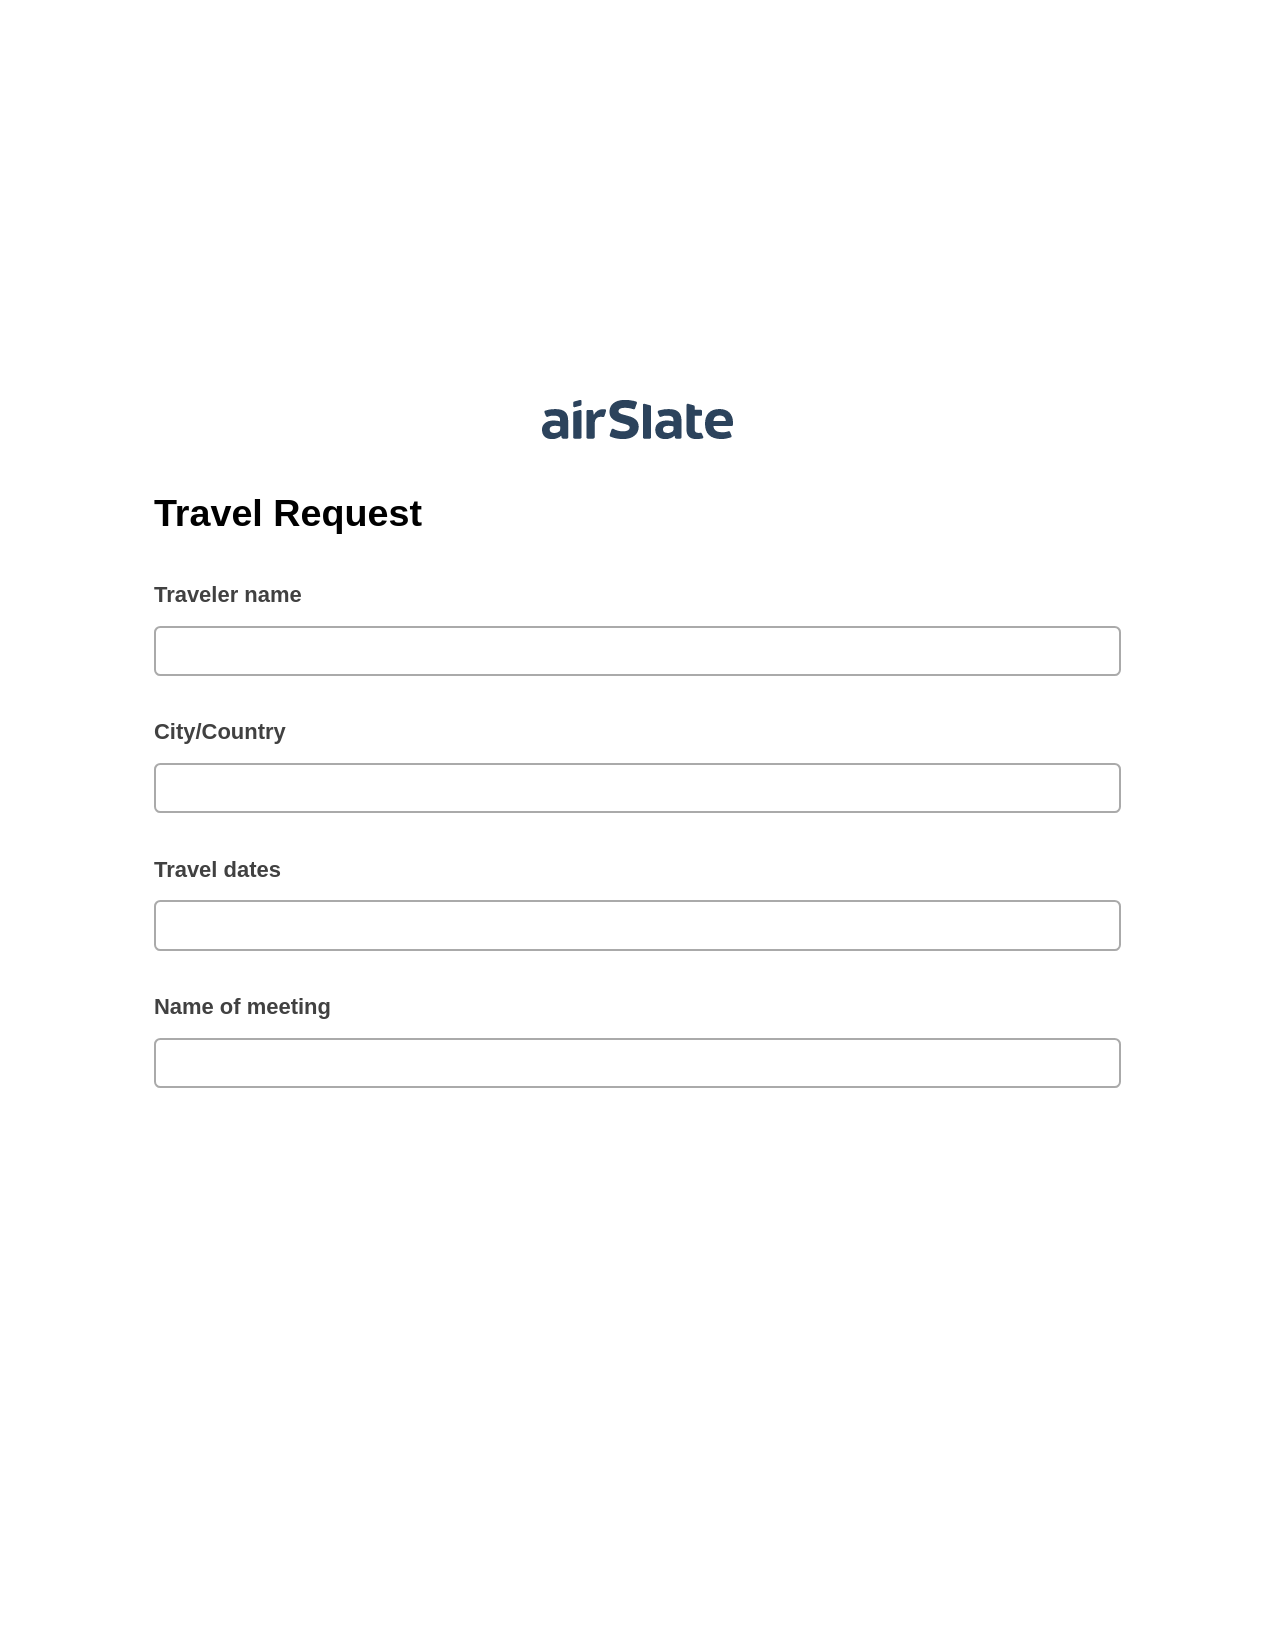 Travel Request Pre-fill Dropdown from Airtable, Create Slate Reminder Bot, OneDrive Bot